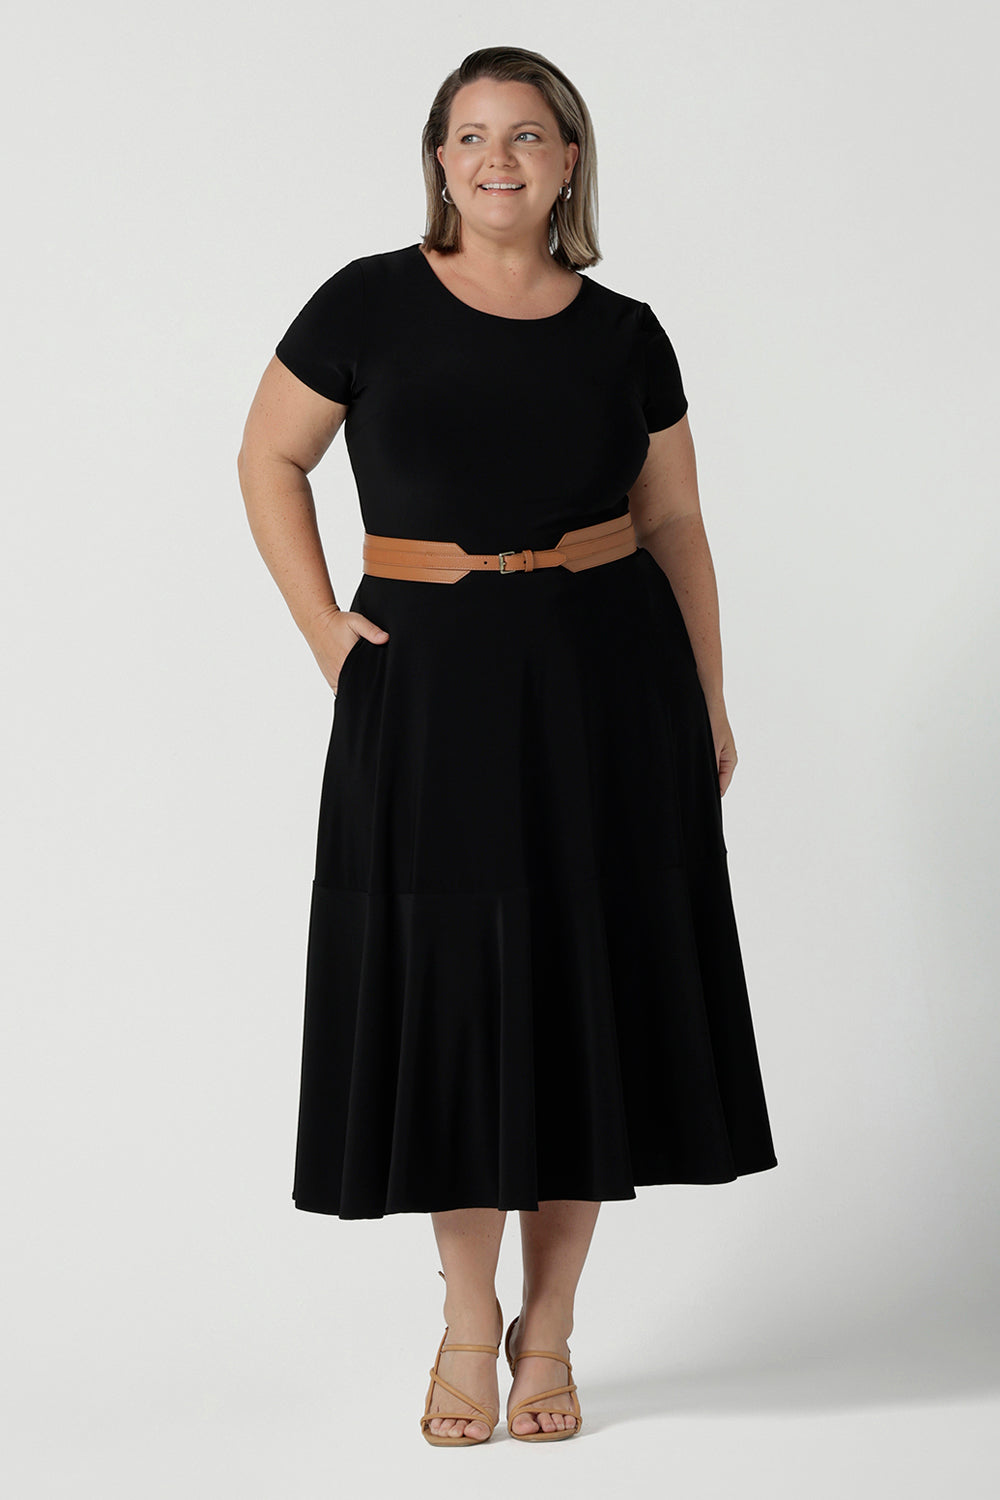 A size 18 woman wears the Amal dress in black is a slim fit round neck dress with waist seam and tier at the bottom. Functioning pockets. Great for work or event occasions. Made in Australia. Styled back with a belt. Size inclusive fashion for women size 8 - 24.